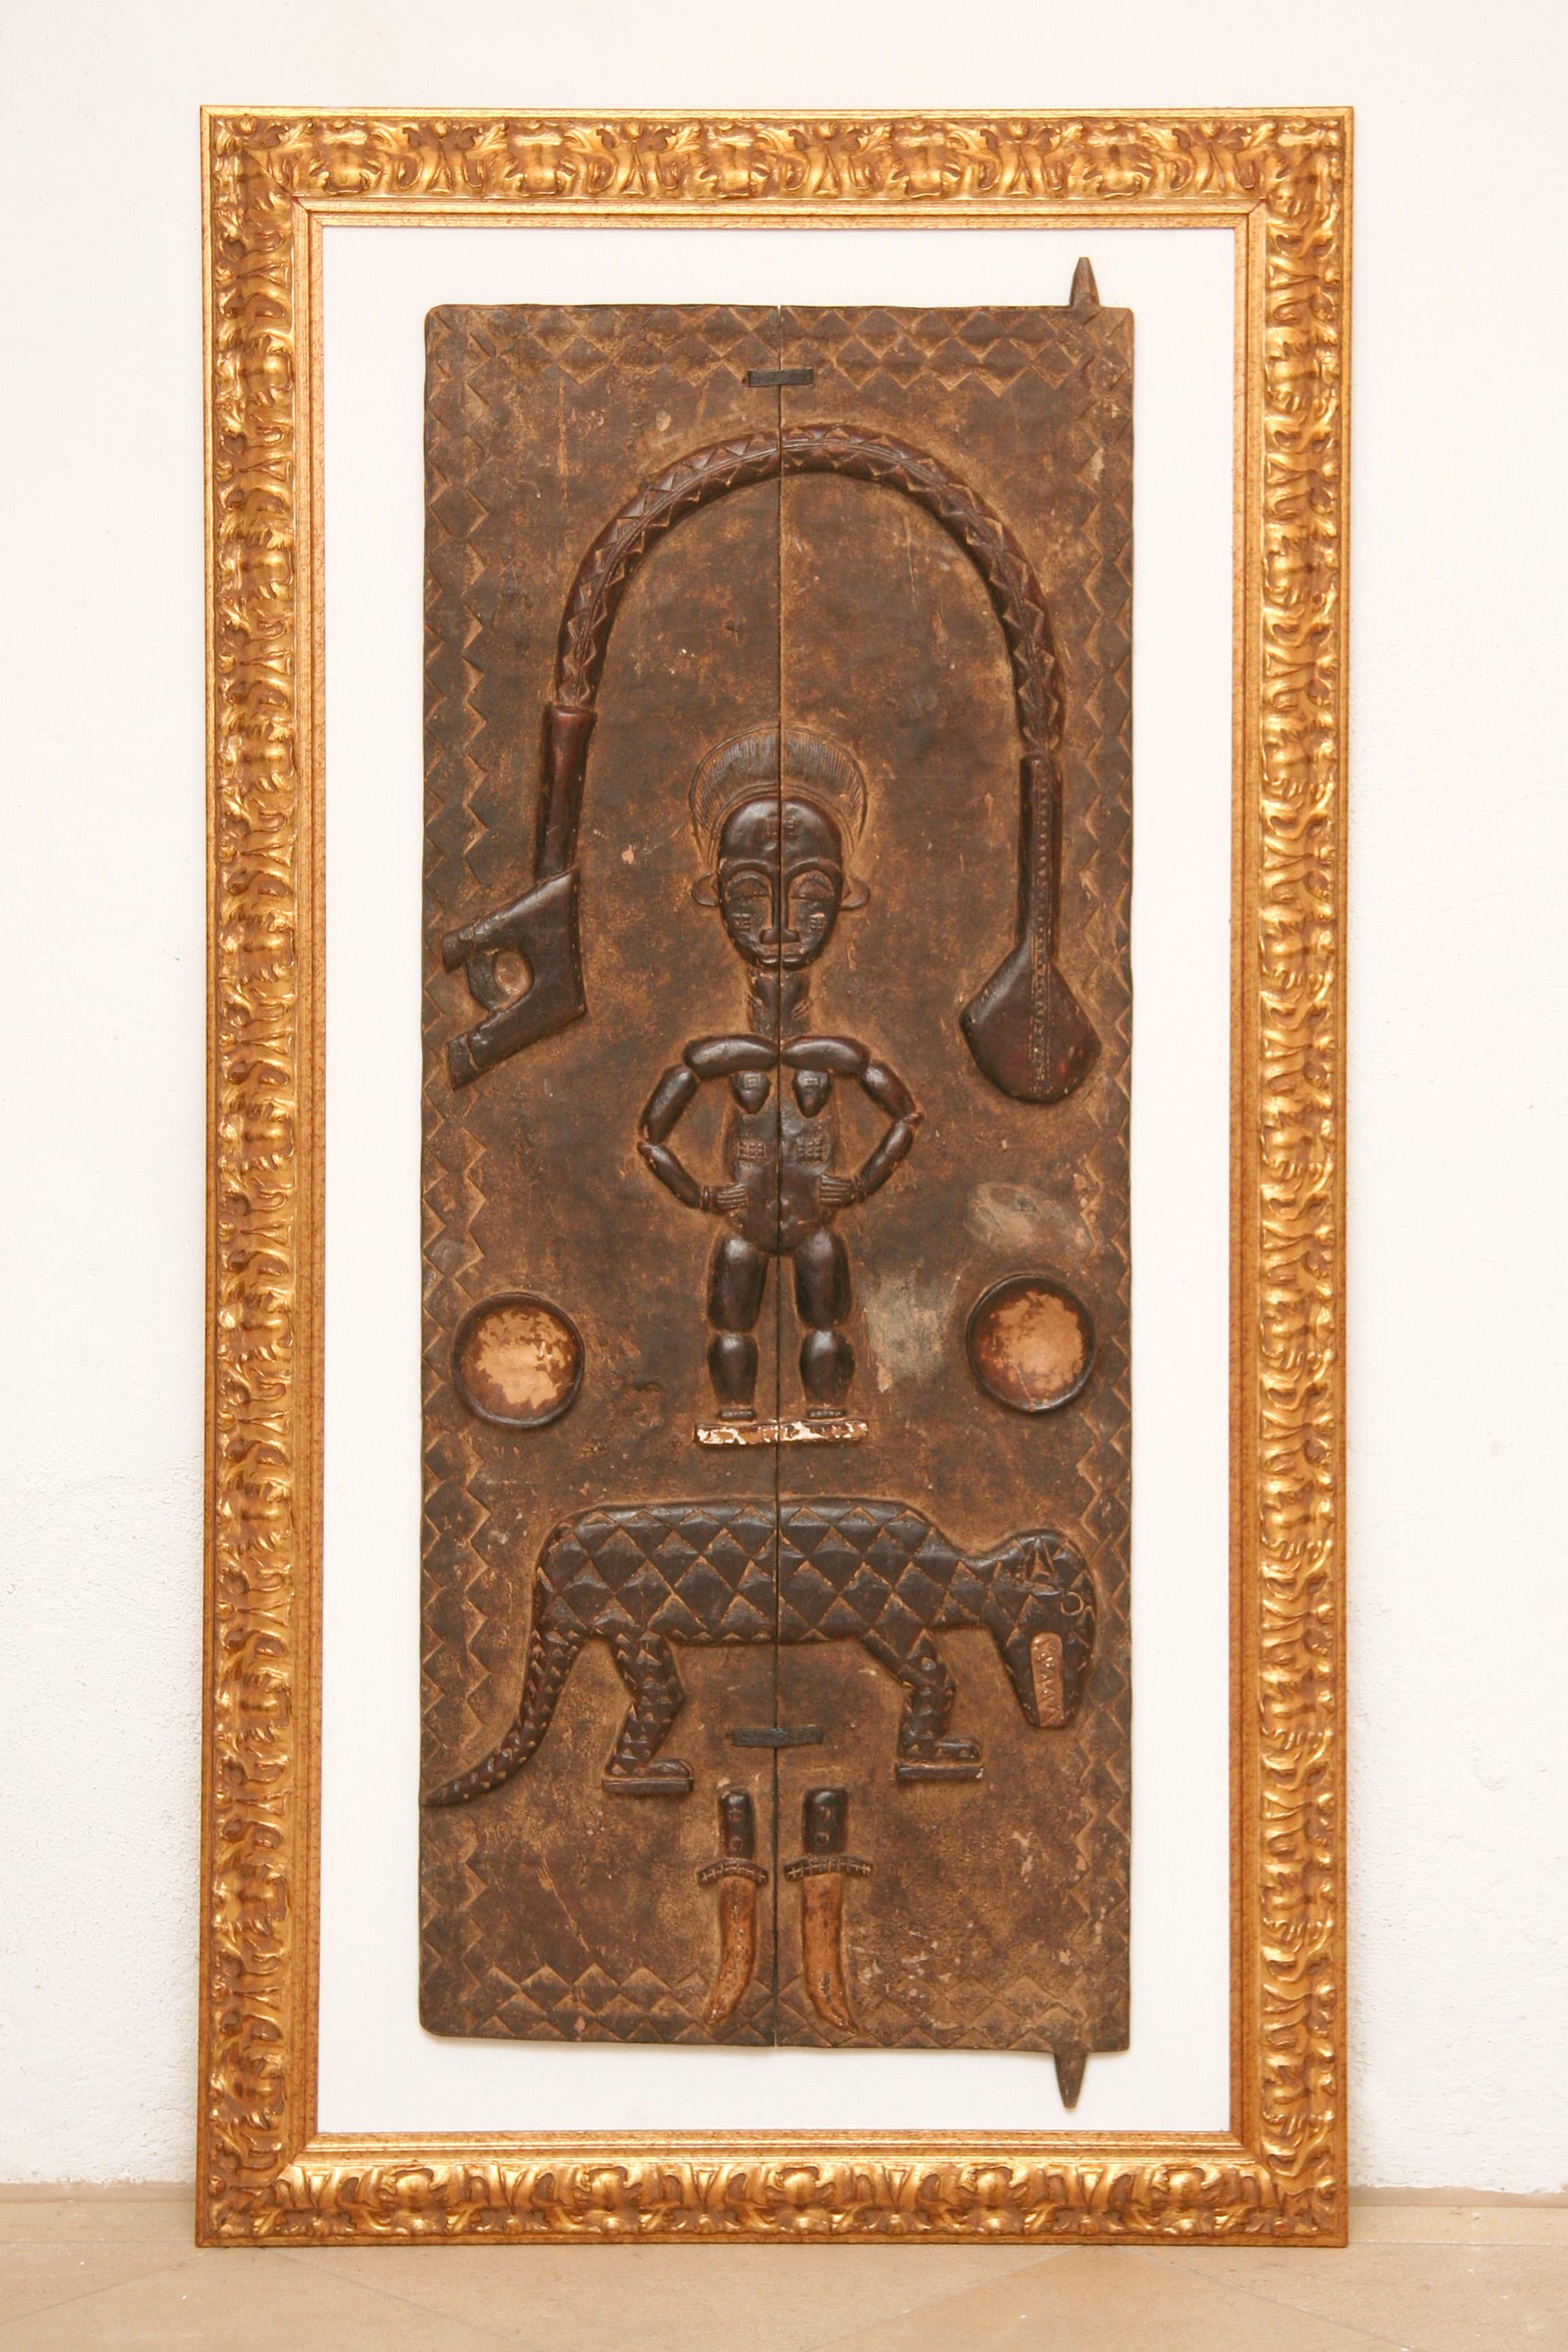 Hand carved solid wooden doors of an African cabinet (Mali/Dogon). 
fixed on a white colored wooden plate, gold framed.
The object shows typical African symbols 1 figure, 1 weapon, 1 leopard, 1 knife 
which due to the depth of carving act like a